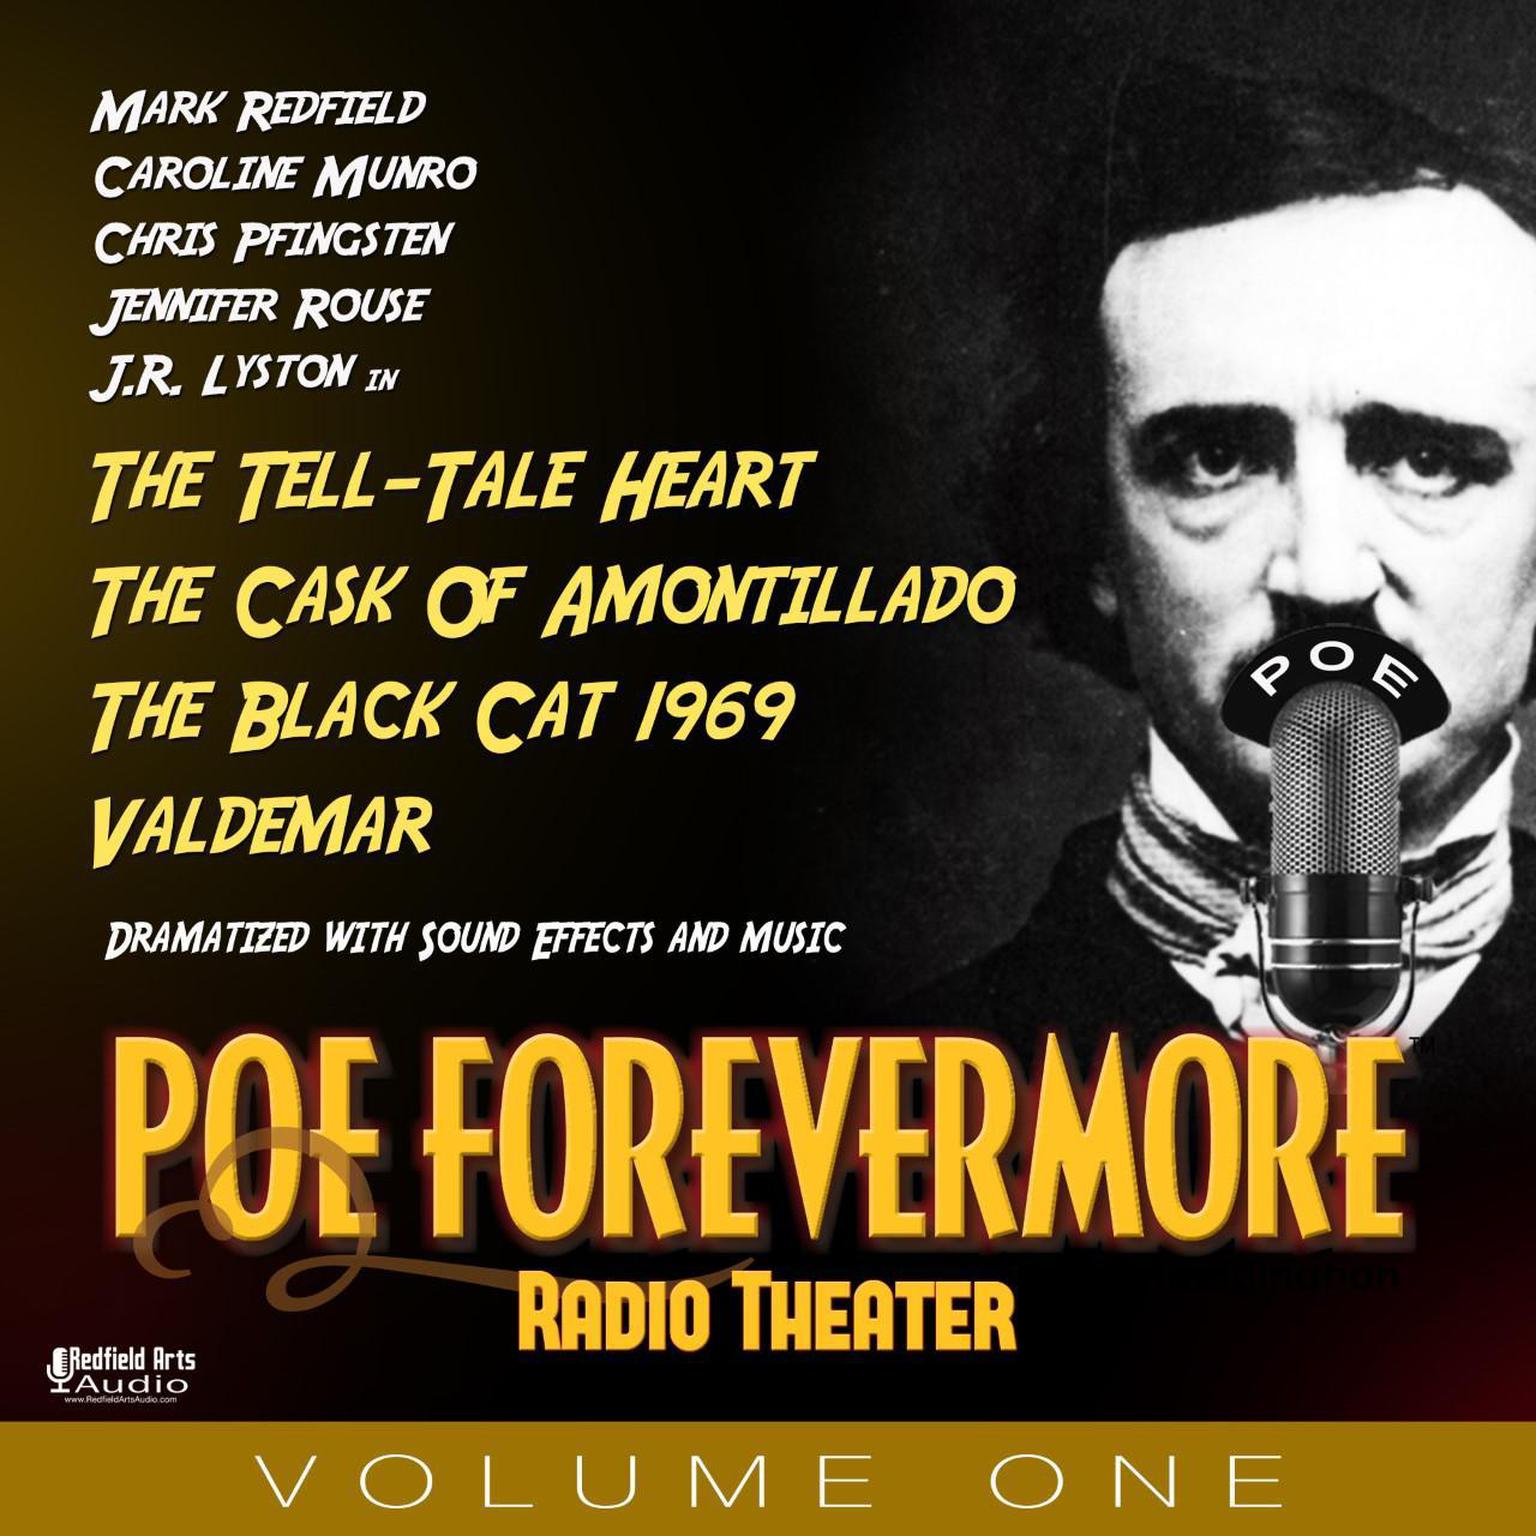 PoeForevermore Radio Theater Volume One: Four Poe Tales of Terror Dramatized! Audiobook, by Edgar Allan Poe